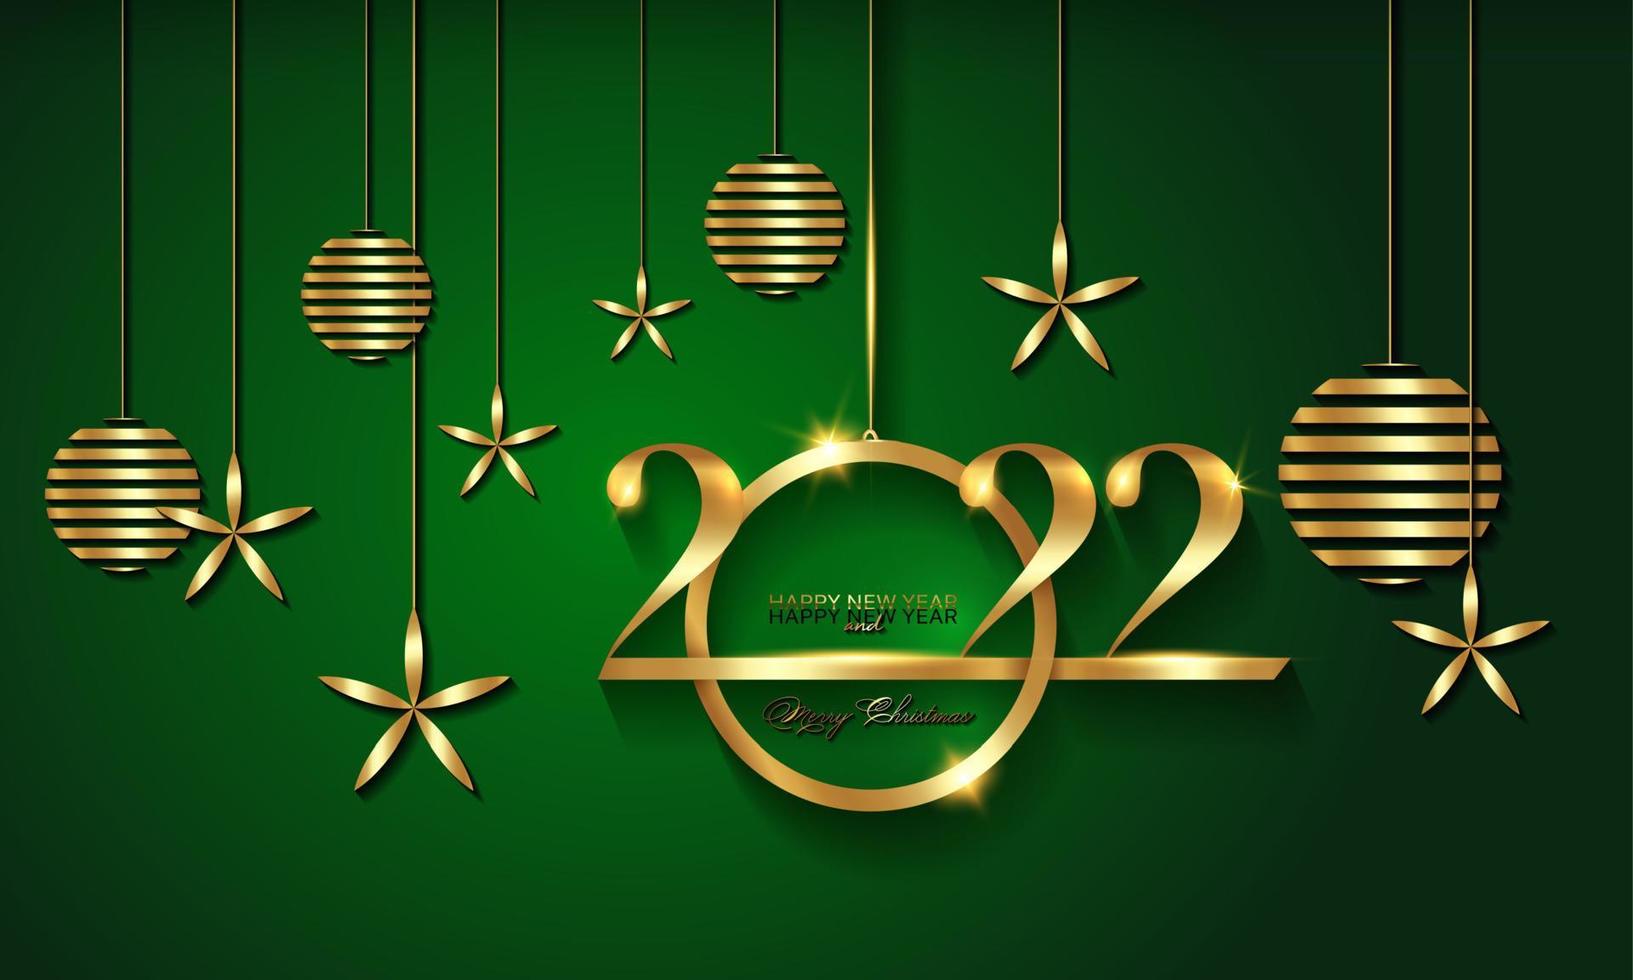 2022 Christmas luxury holiday banner with gold handwritten Merry Christmas and Happy New Year, gold colored Christmas balls. Vector illustration isolated on green background